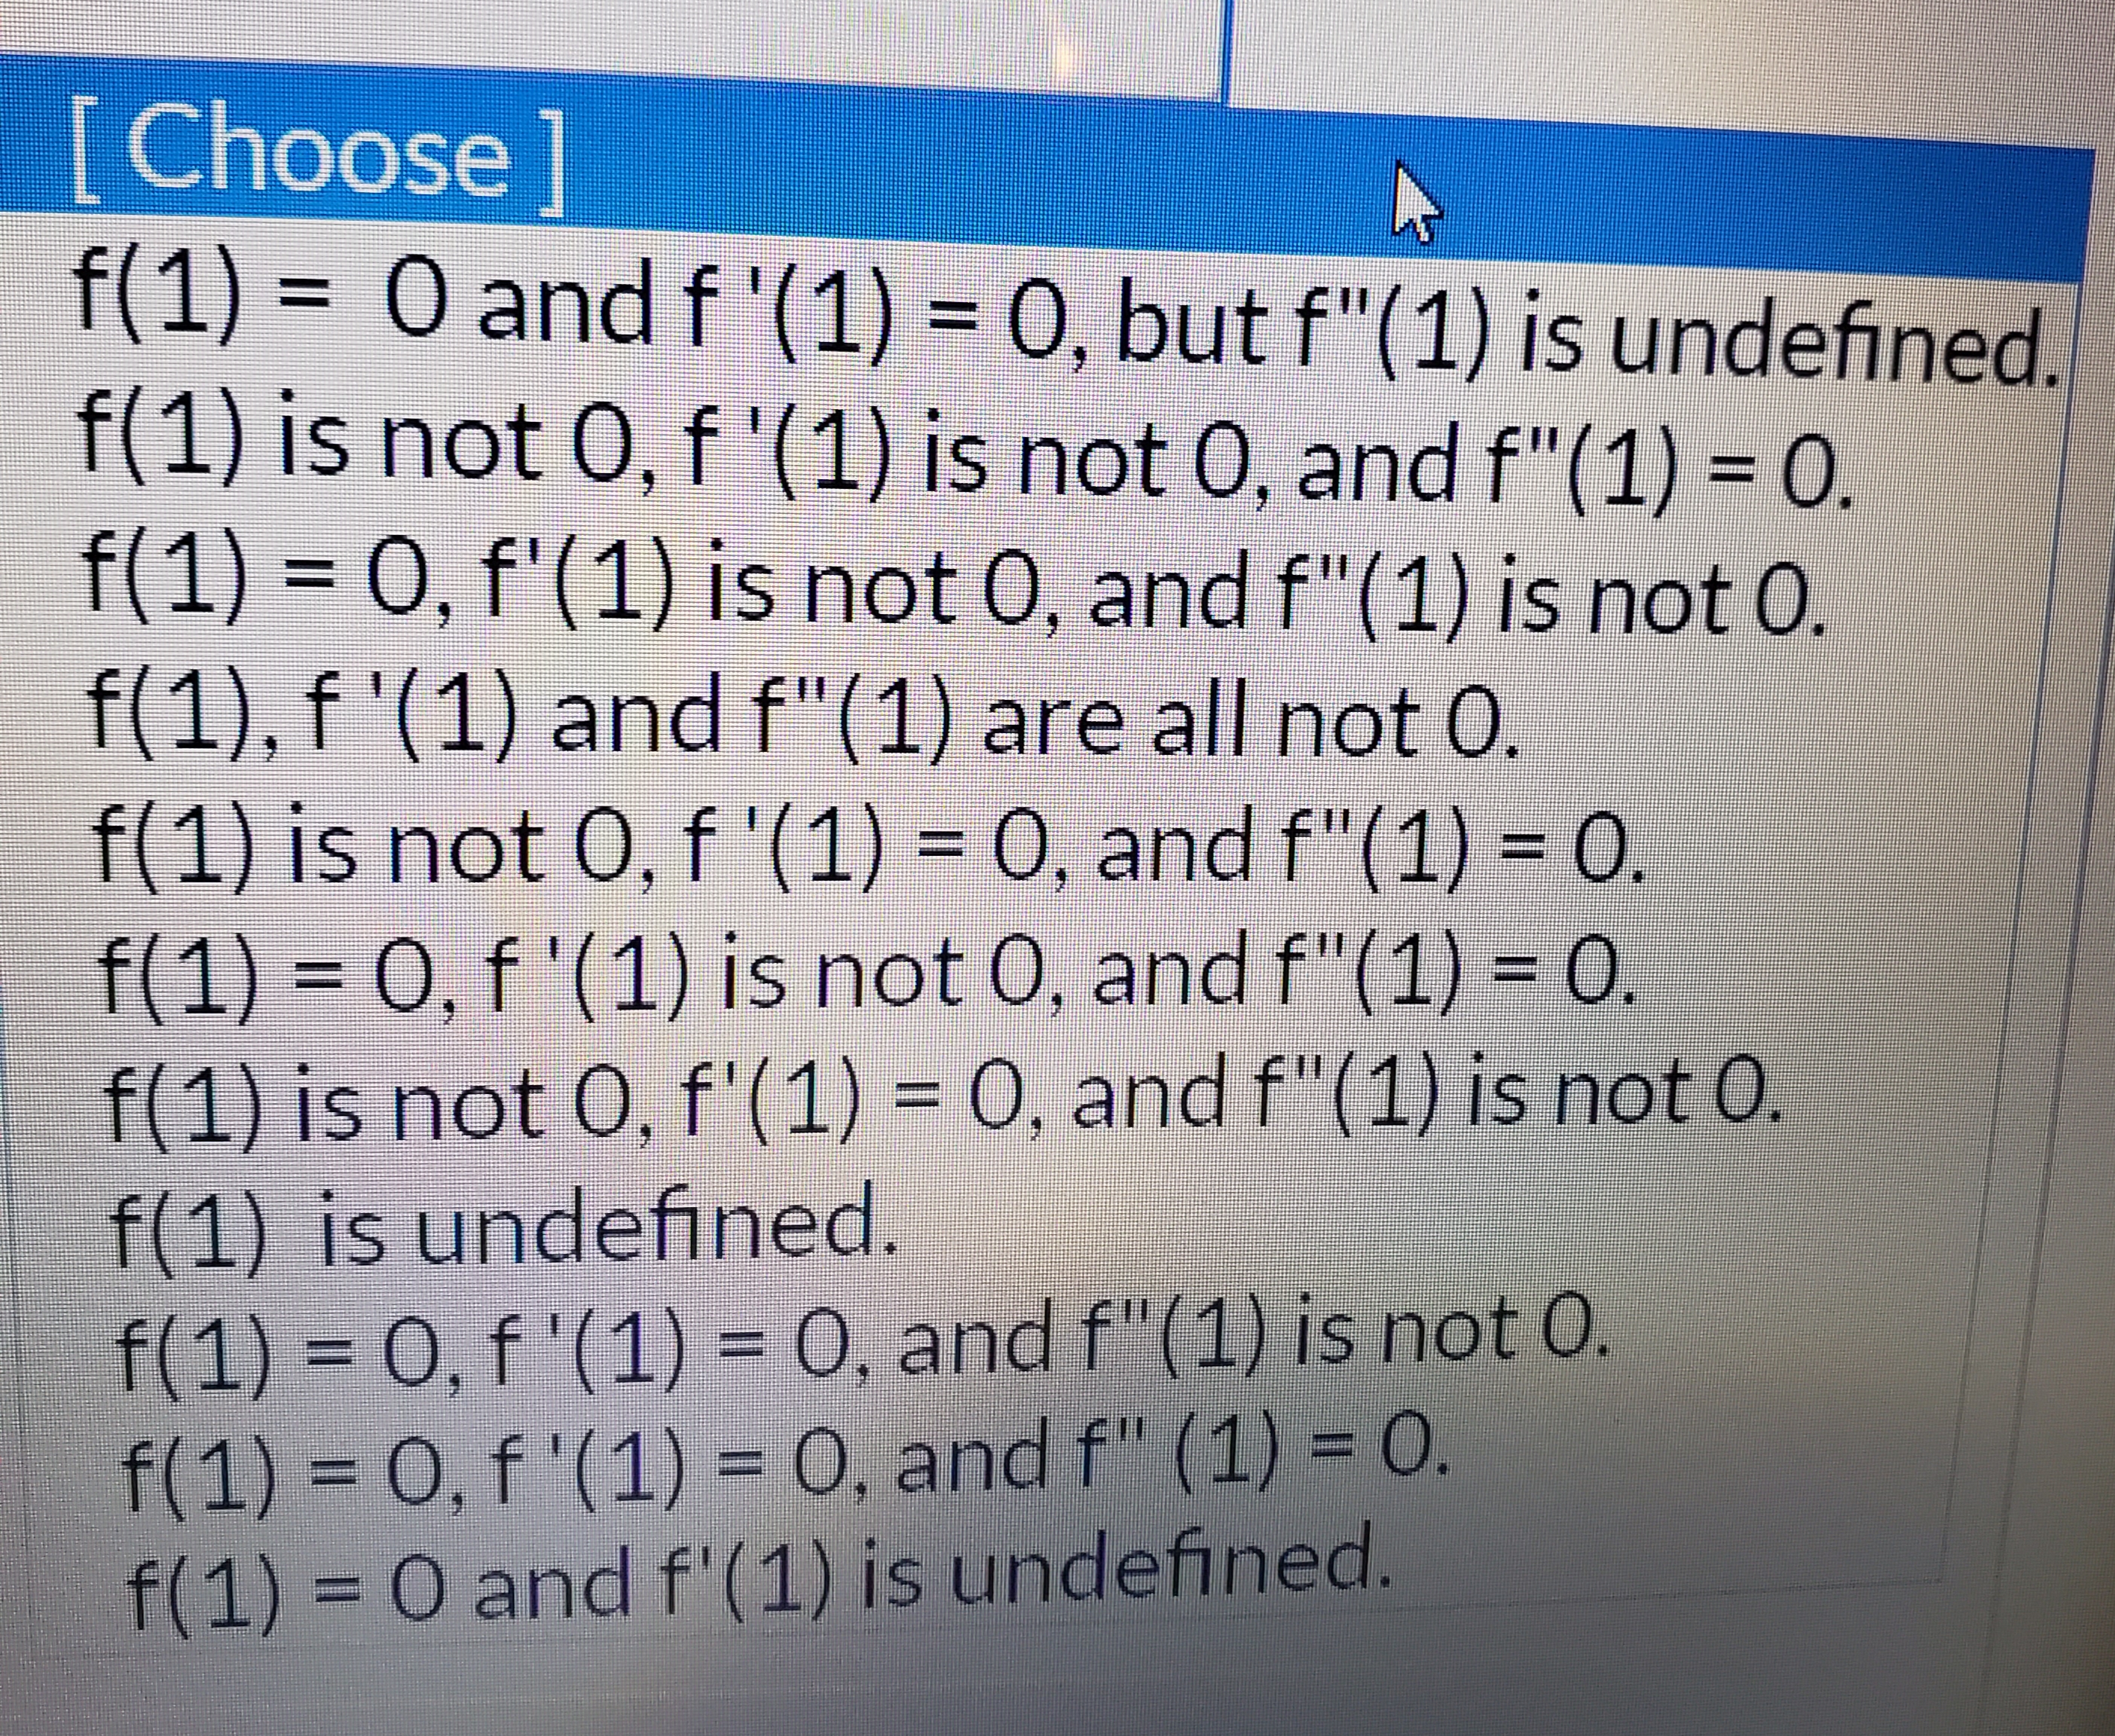 [Choose]
f(1) 0 andf'(1) = 0, but f"(1) is undefined.
f(1) is not 0, f '(1) is not 0, and f"(1) = 0.
f(1) 0, f'(1) is not 0, and f"(1) is not 0.
f(1), f '(1) and f"(1) are all not 0.
f(1) is not 0, f '(1) = 0, and f"(1) = 0.
f(1)
0, f '(1) is not 0, and f"(1) = 0.
f(1) is not 0, f'(1) = 0, and f"(1) is not 0.
f(1) is undefined.
f(1) 0, f'(1) = 0, and f"(1) is not 0.
f(1) 0, f'(1) = O, and f" (1) = 0.
O and f'(1) is undefined.
f(1)
